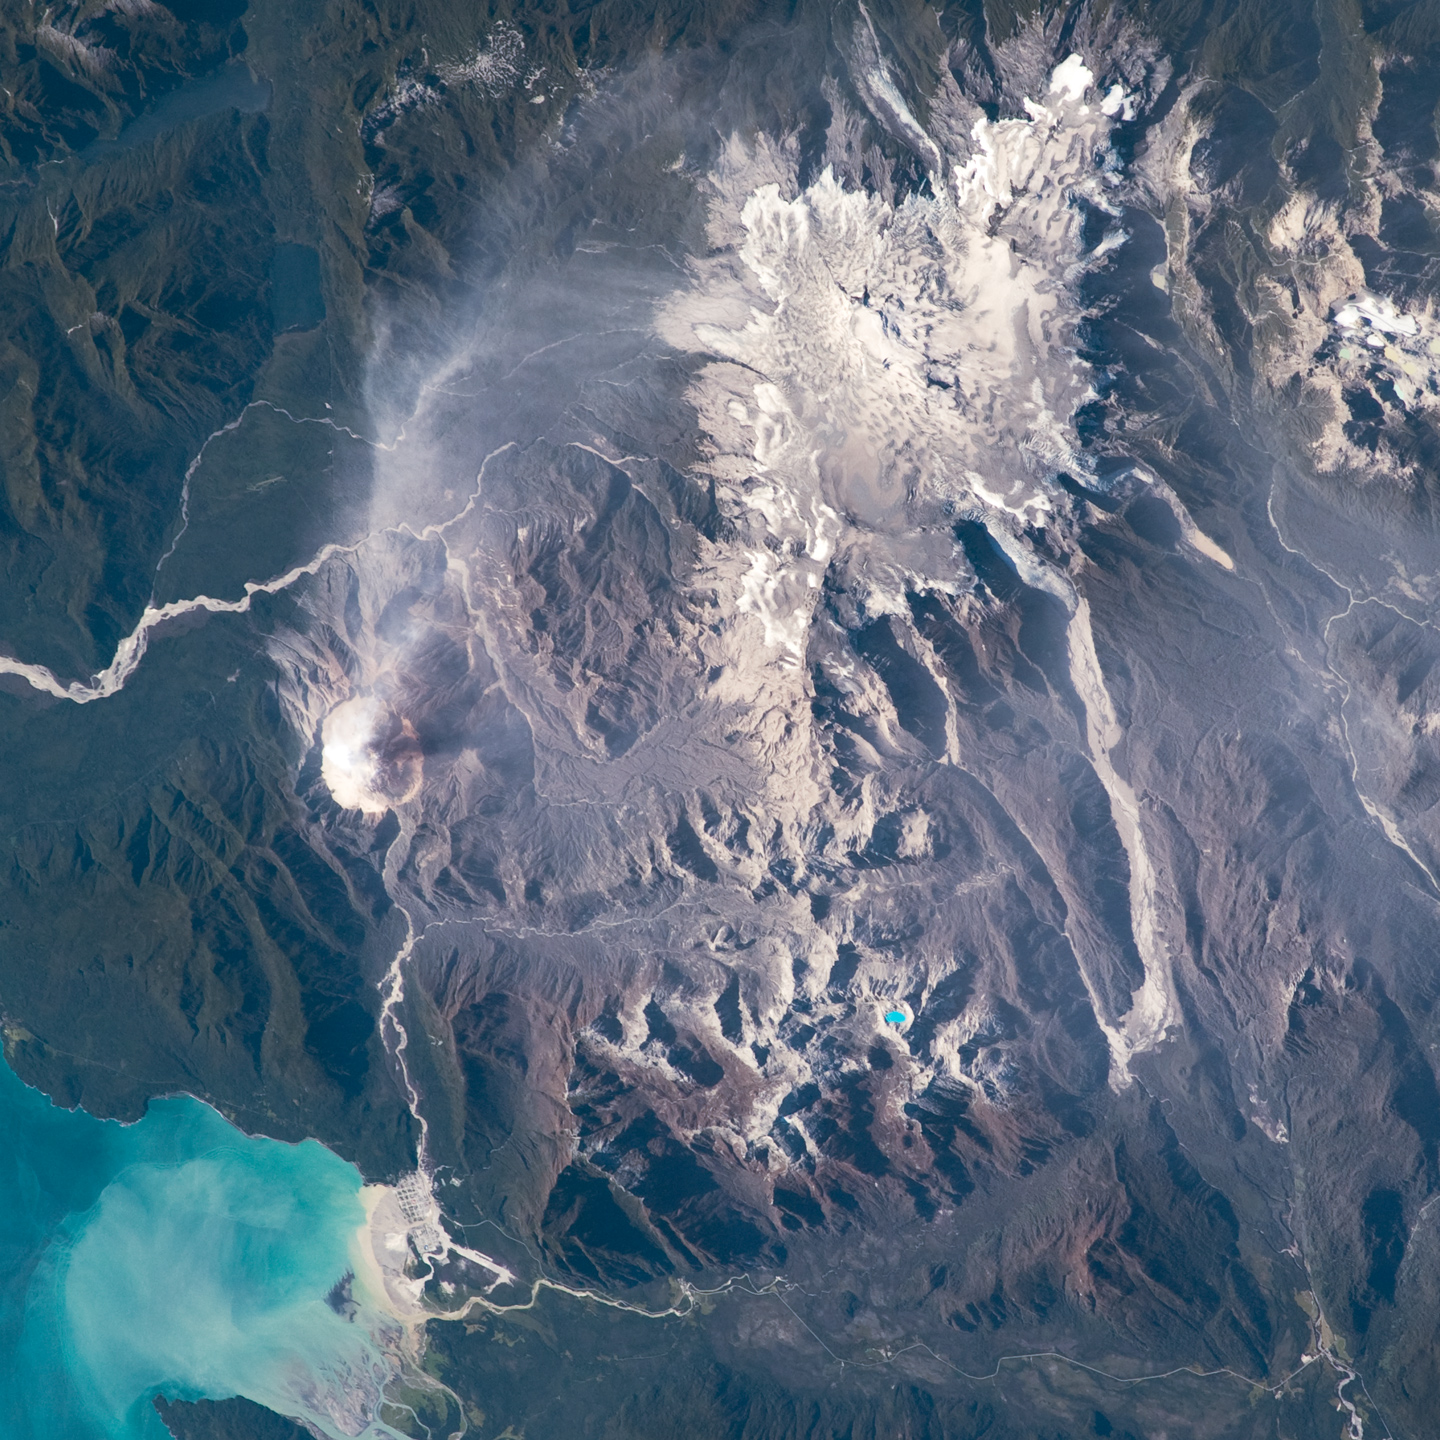 Minchinmavida and Chaiten Volcanoes, Chile - related image preview